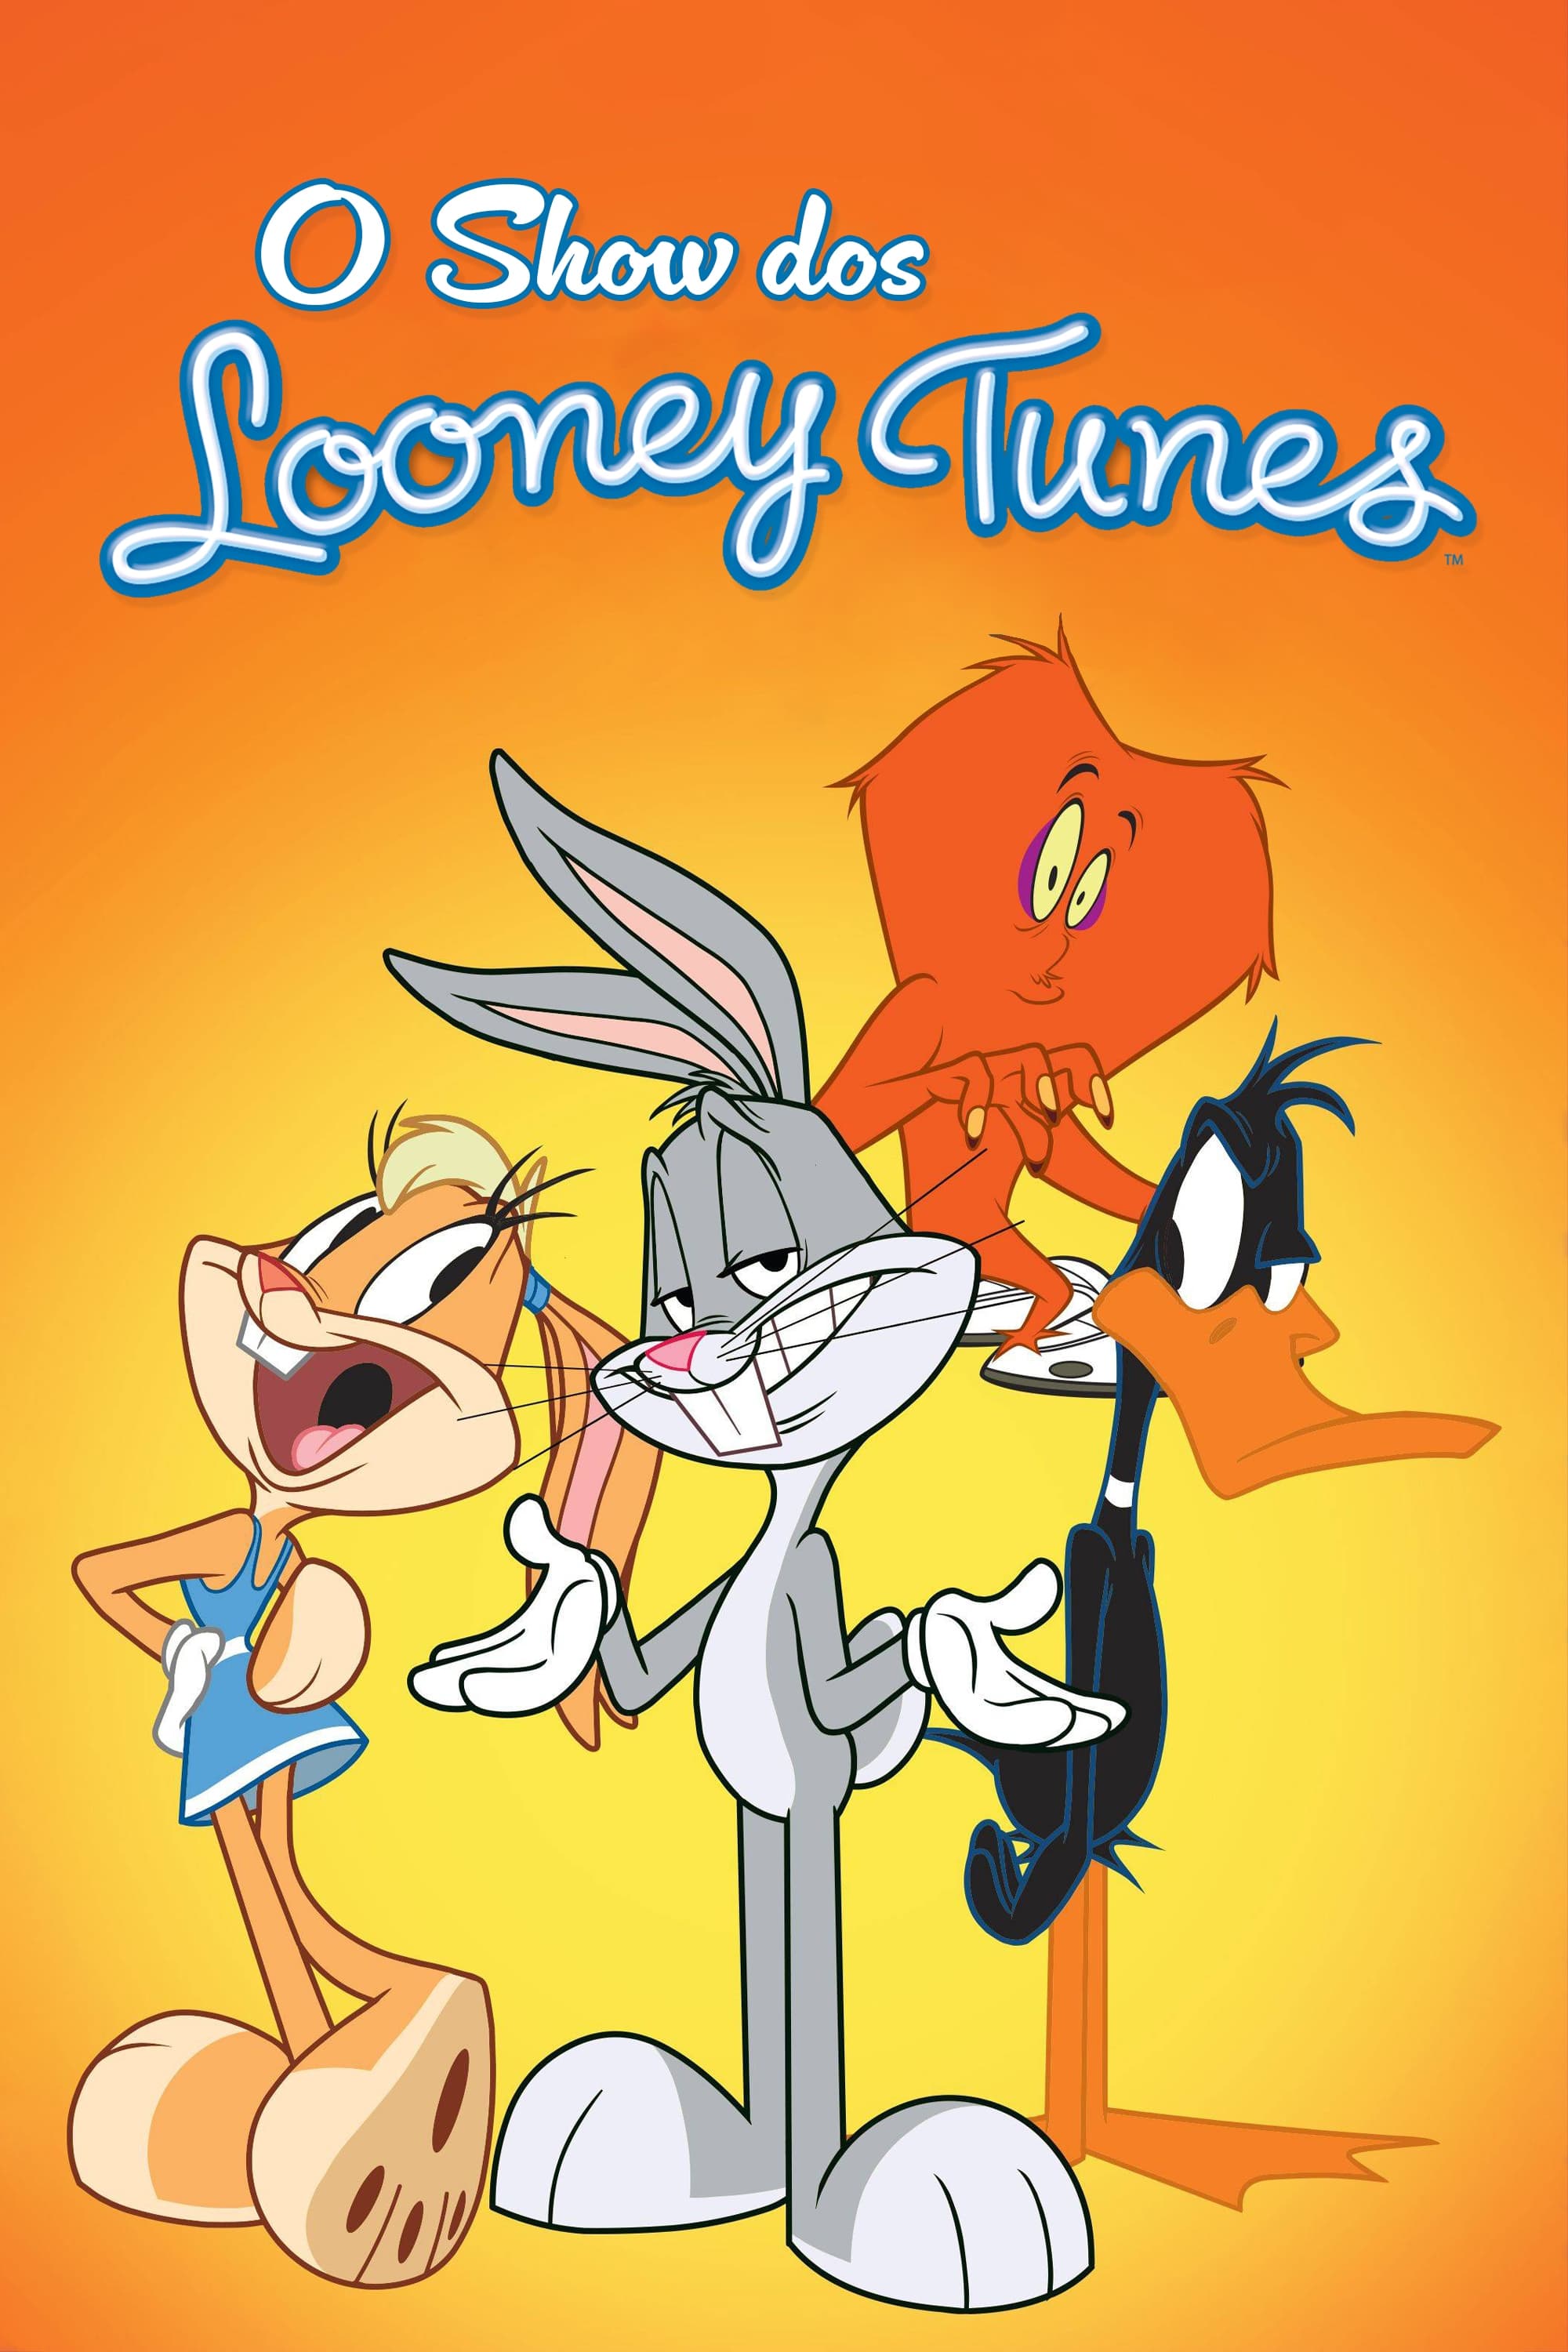 Looney Tunes painting and drawing in Digital -  Portugal